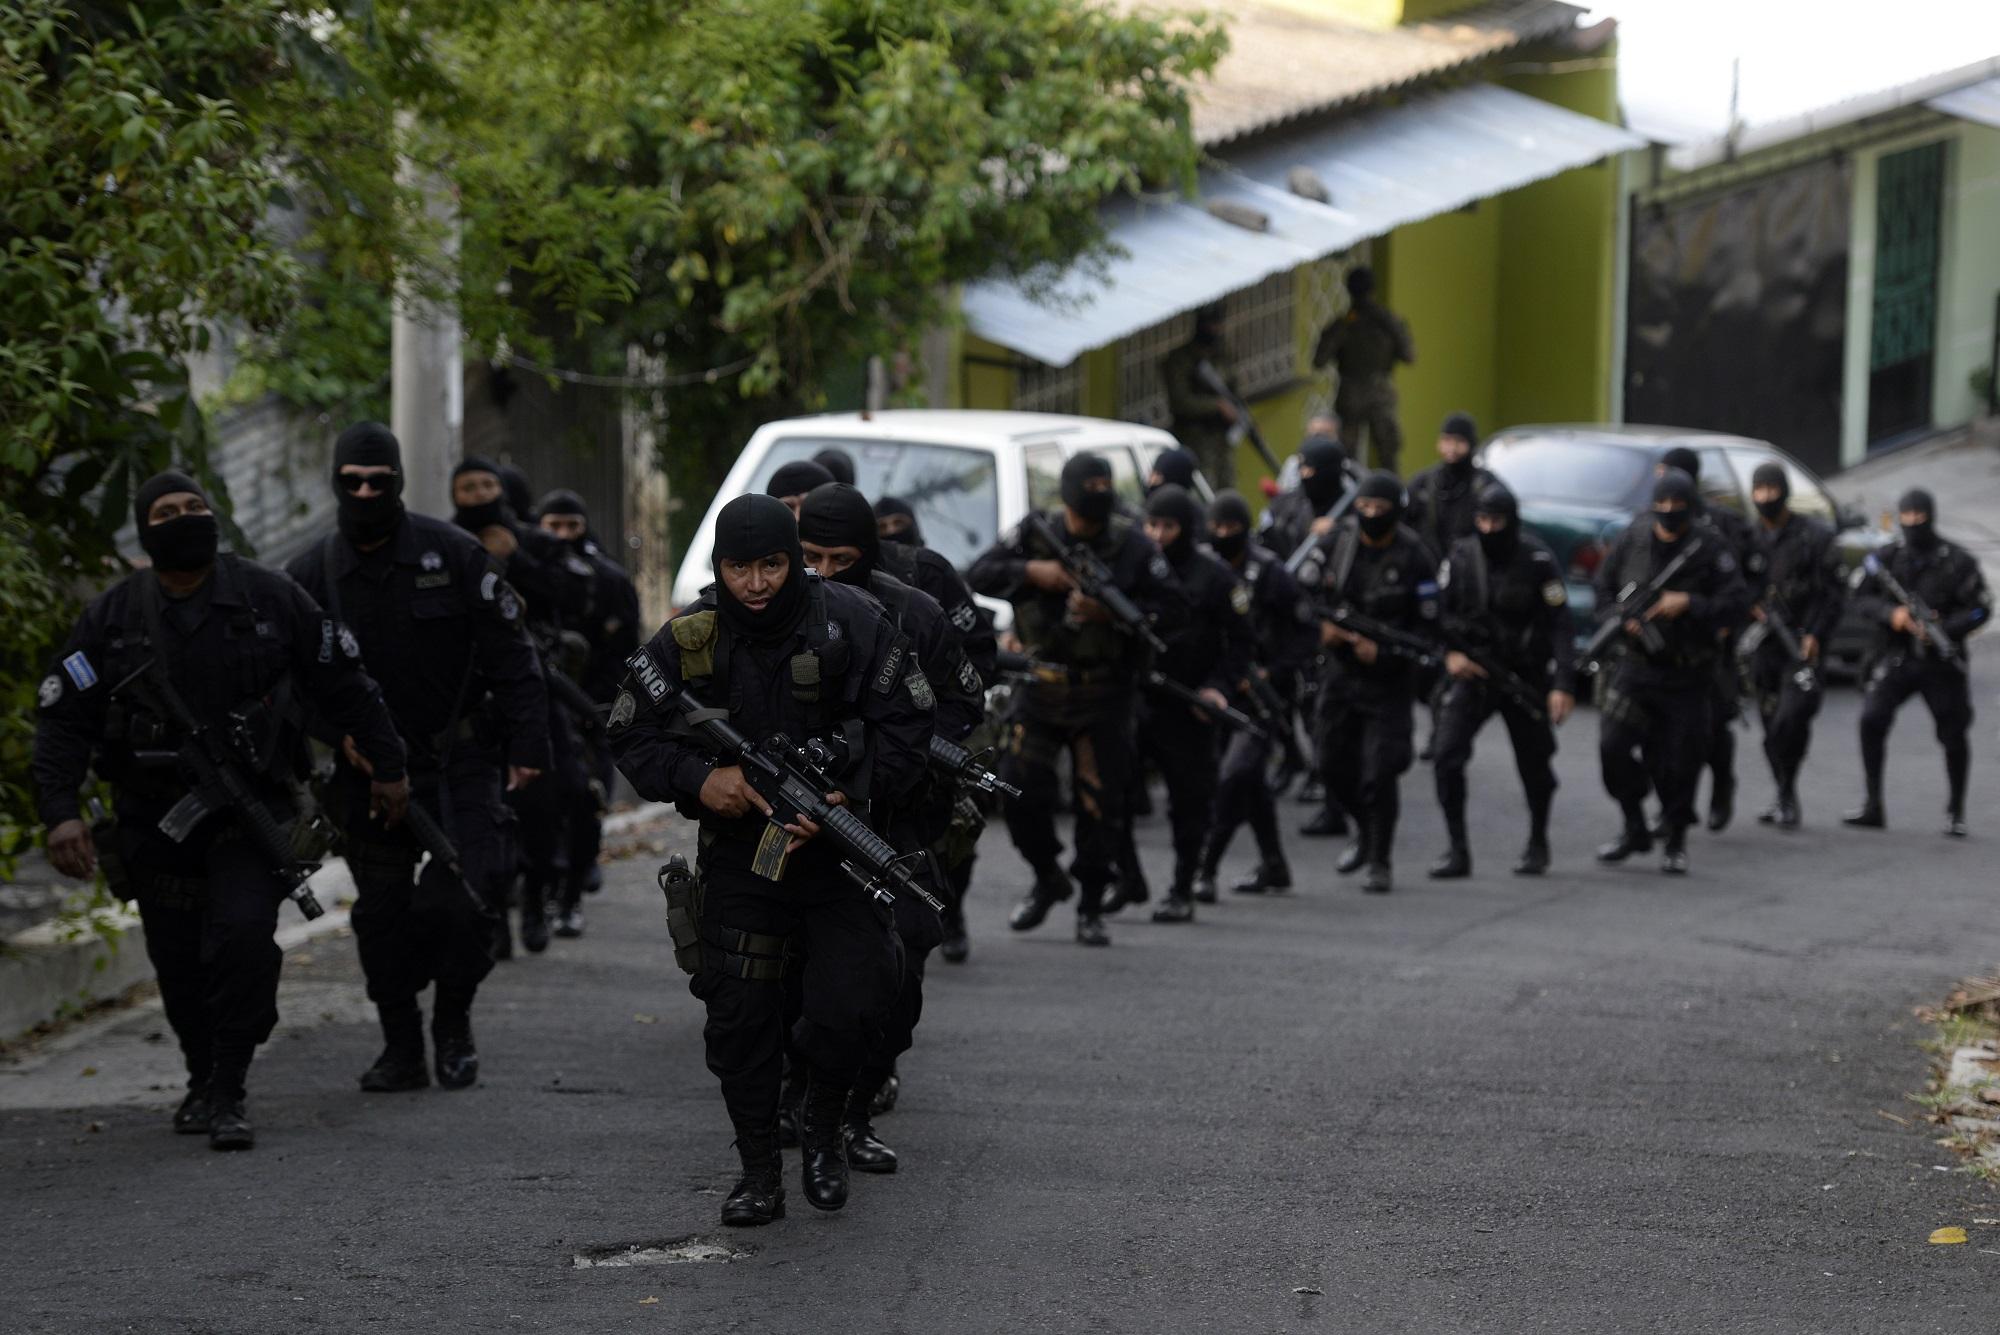 Policía Nacional Civil. Mejicanos. Maras. Members of the Salvadorean National Civil Police participate in an operation in search of 18th Street gang members in San Salvador on May 12, 2015. More than 10,000 gang members remain in Salvadoran prisons and another 60,000 are believed to be on the streets, according to authorities. Foto Marvin Recinos (AFP).